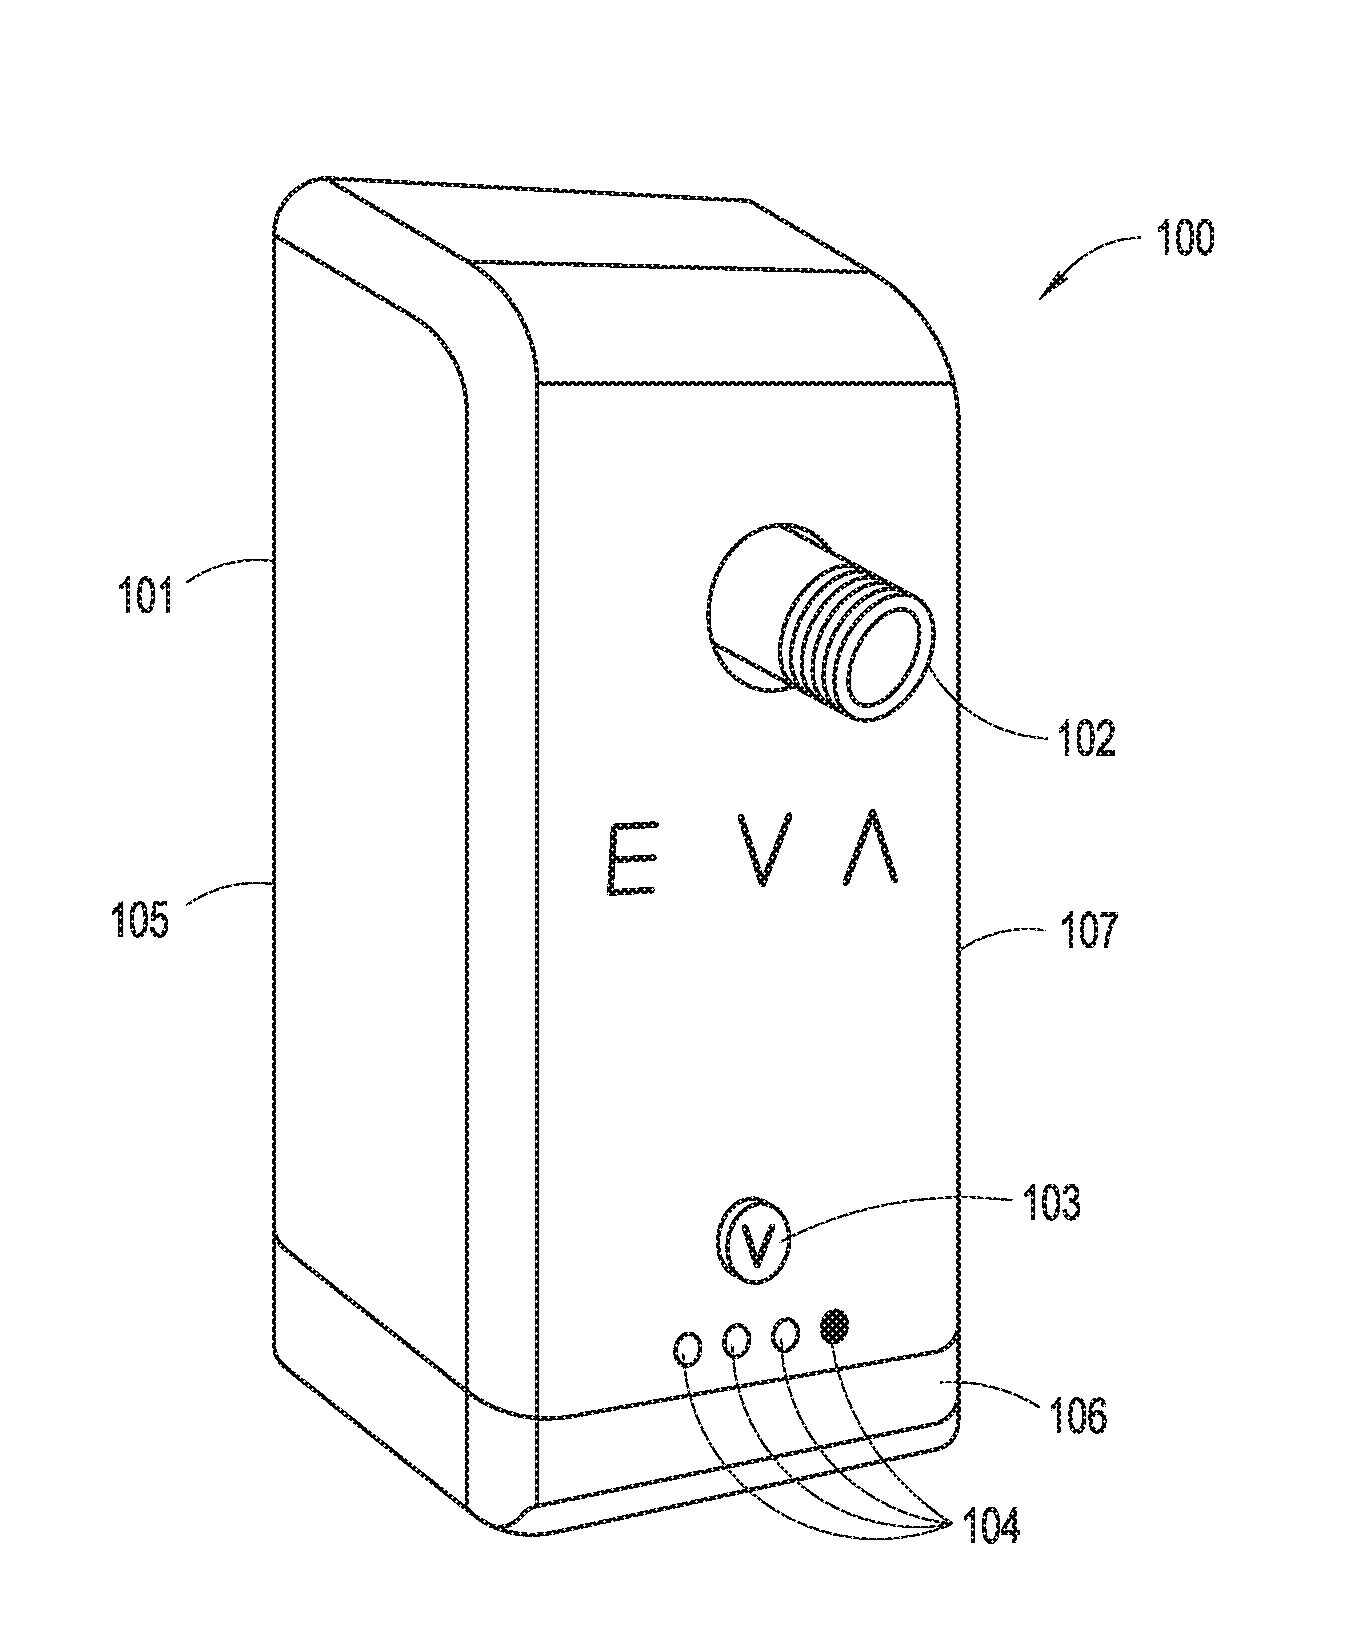 Systems and methods for controlling water flow